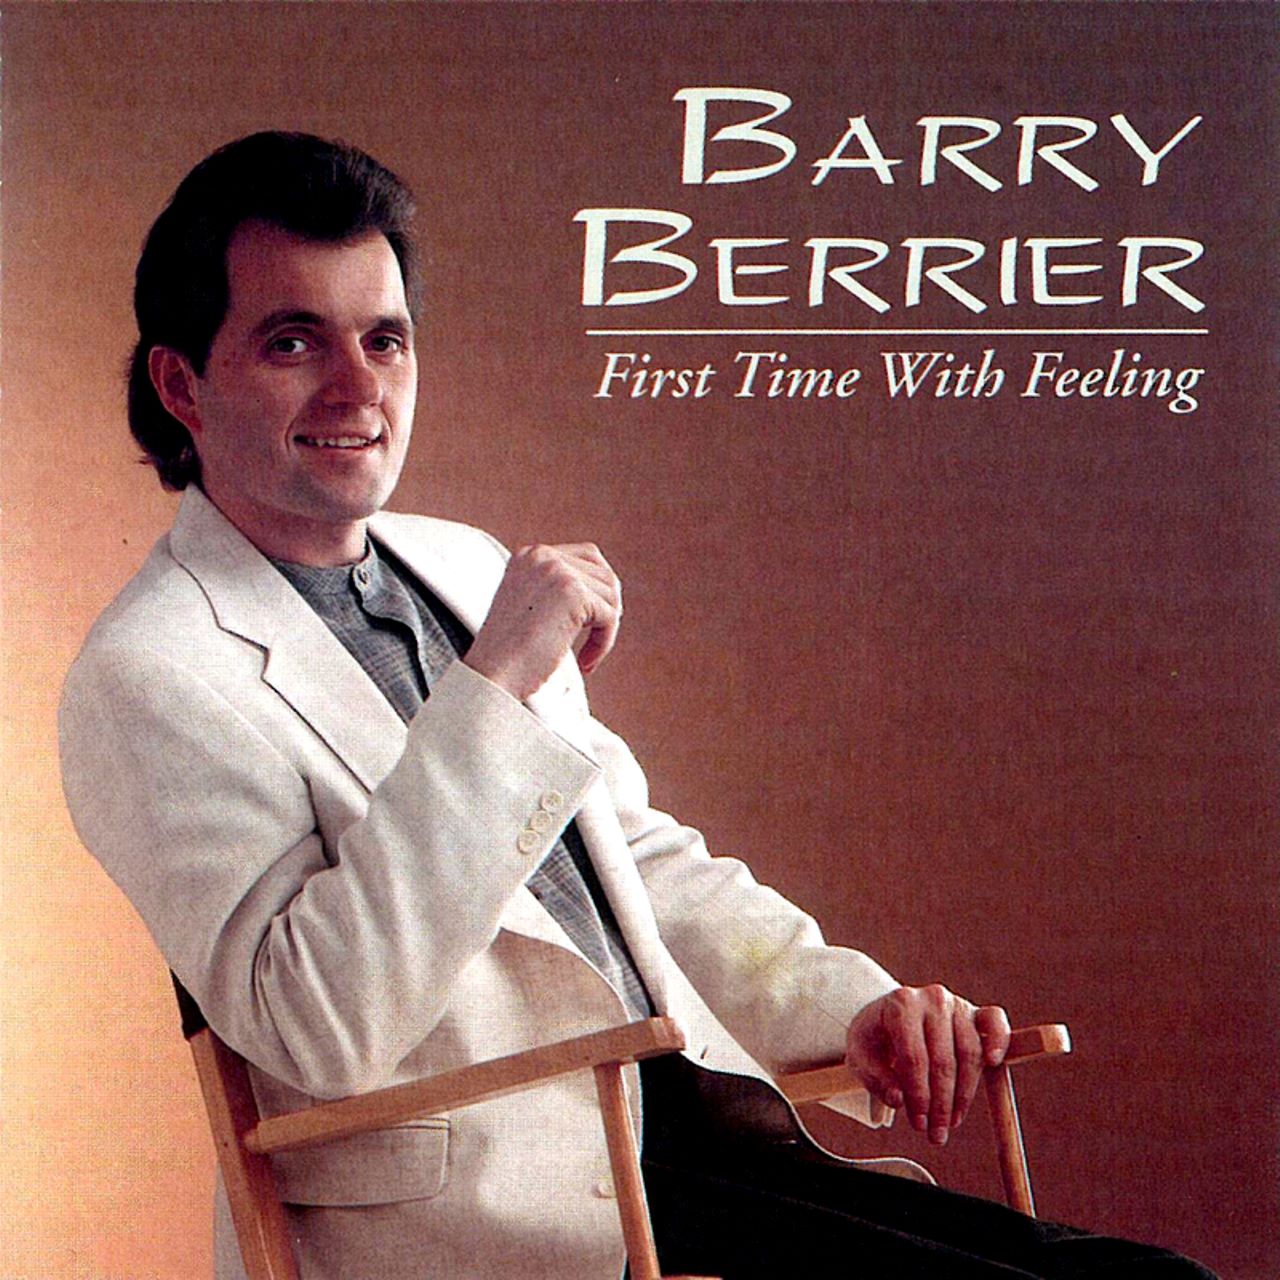 Barry Berrier - First Time With Feeling cover album